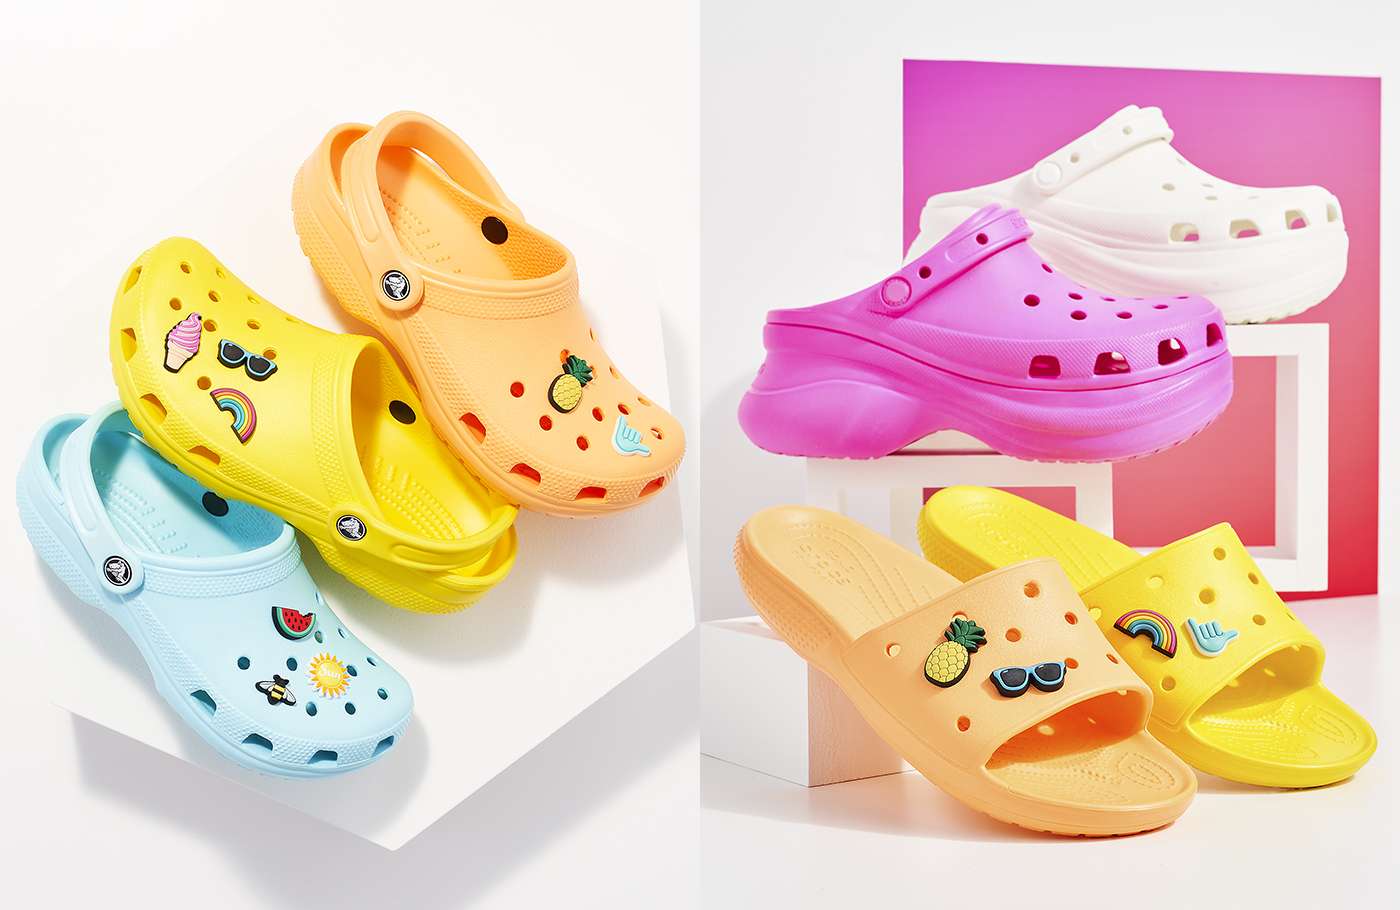 How Much Are Crocs At Rack Room Shoes - LoveShoesClub.com